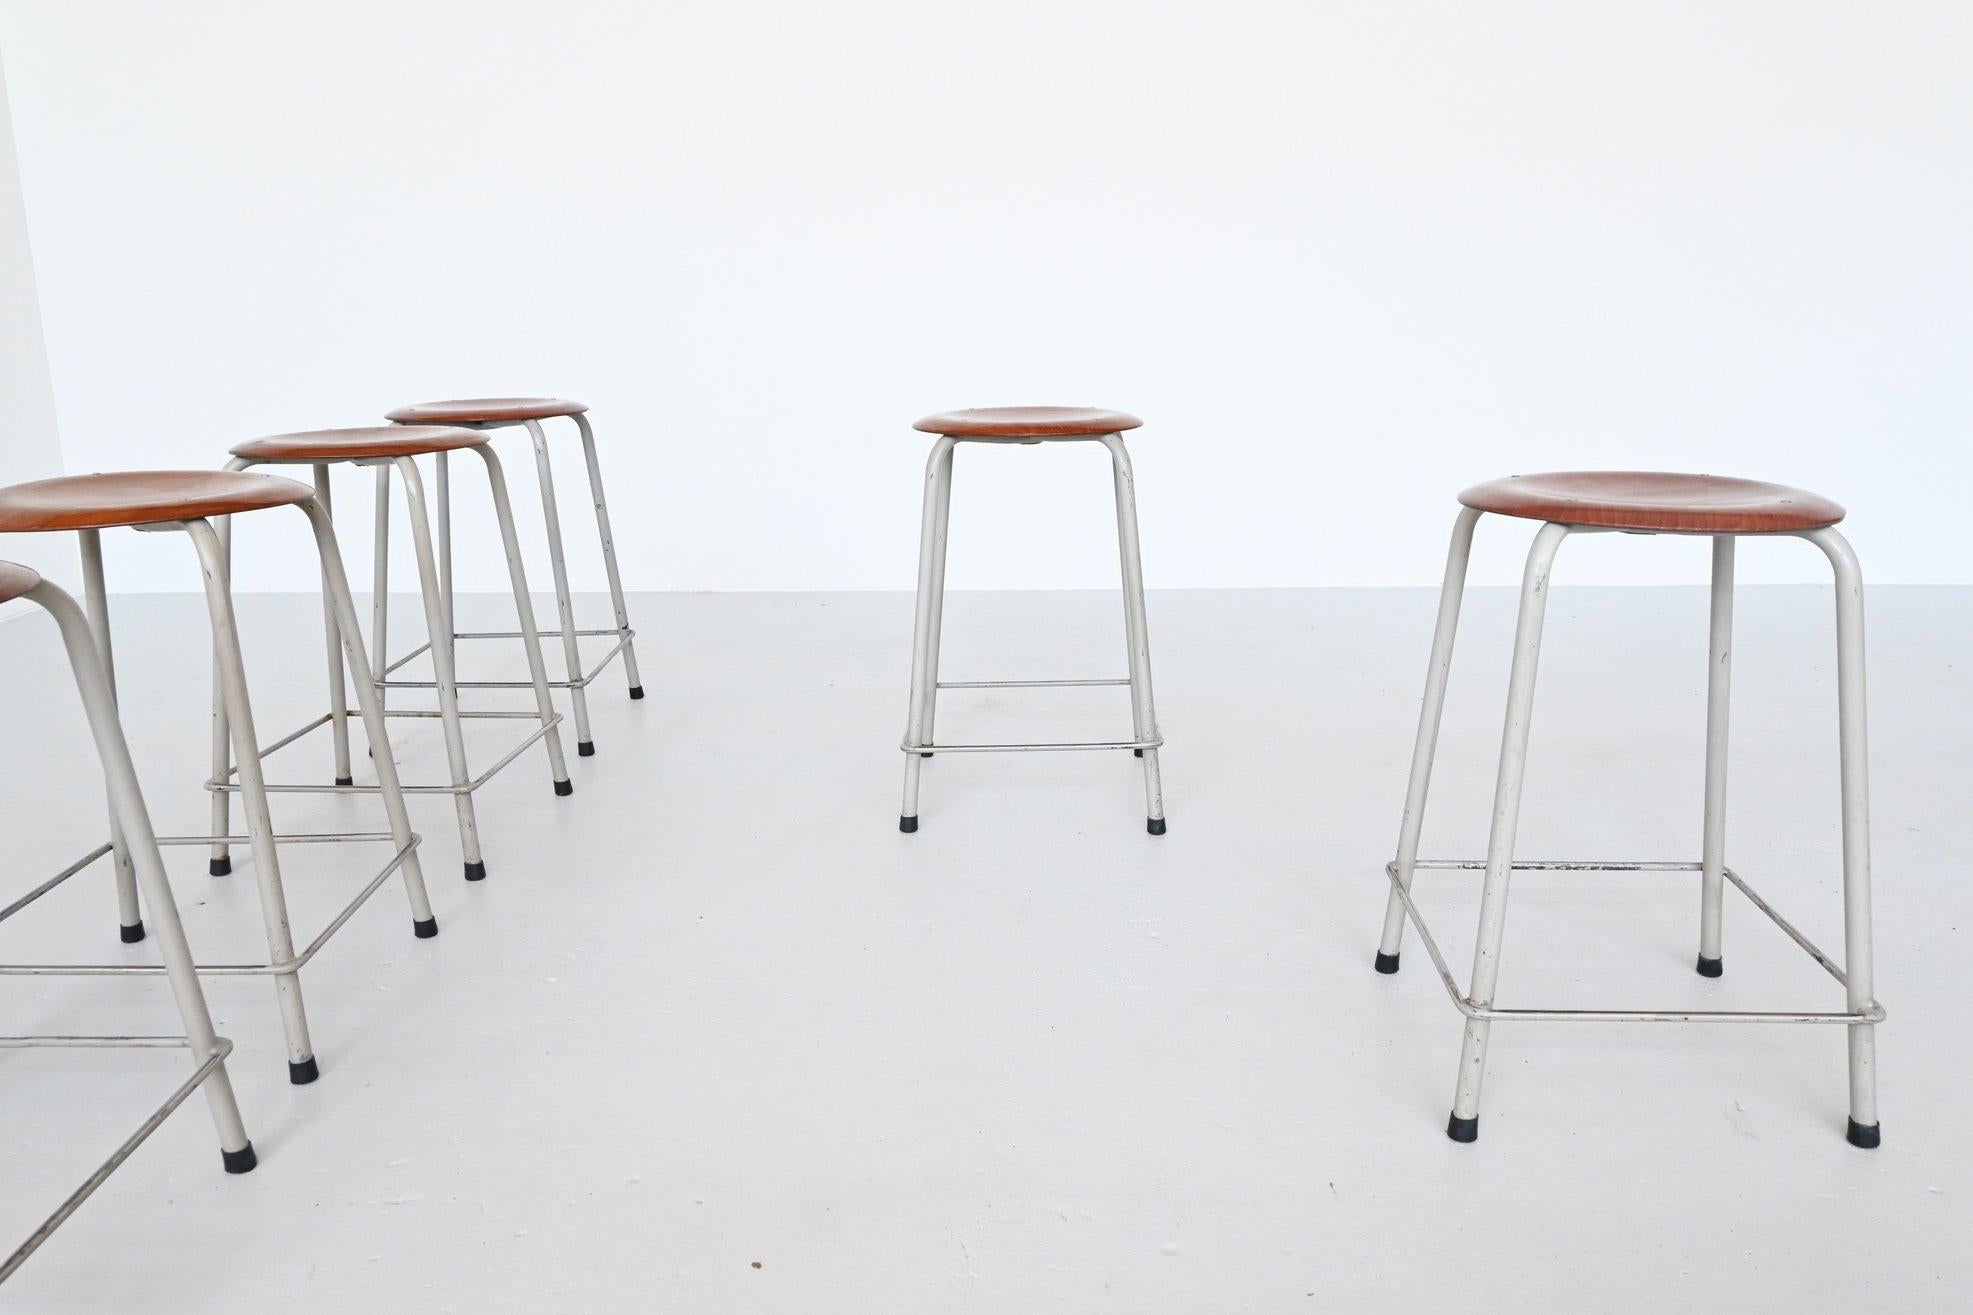 Very nice stools made by Ahrend de Cirkel, the Netherlands, 1970. These stools have a very nice light grey lacquered tubular metal frame and a round teak pagwood seat. The stools are stackable and we have 20 pieces available. All are in very good